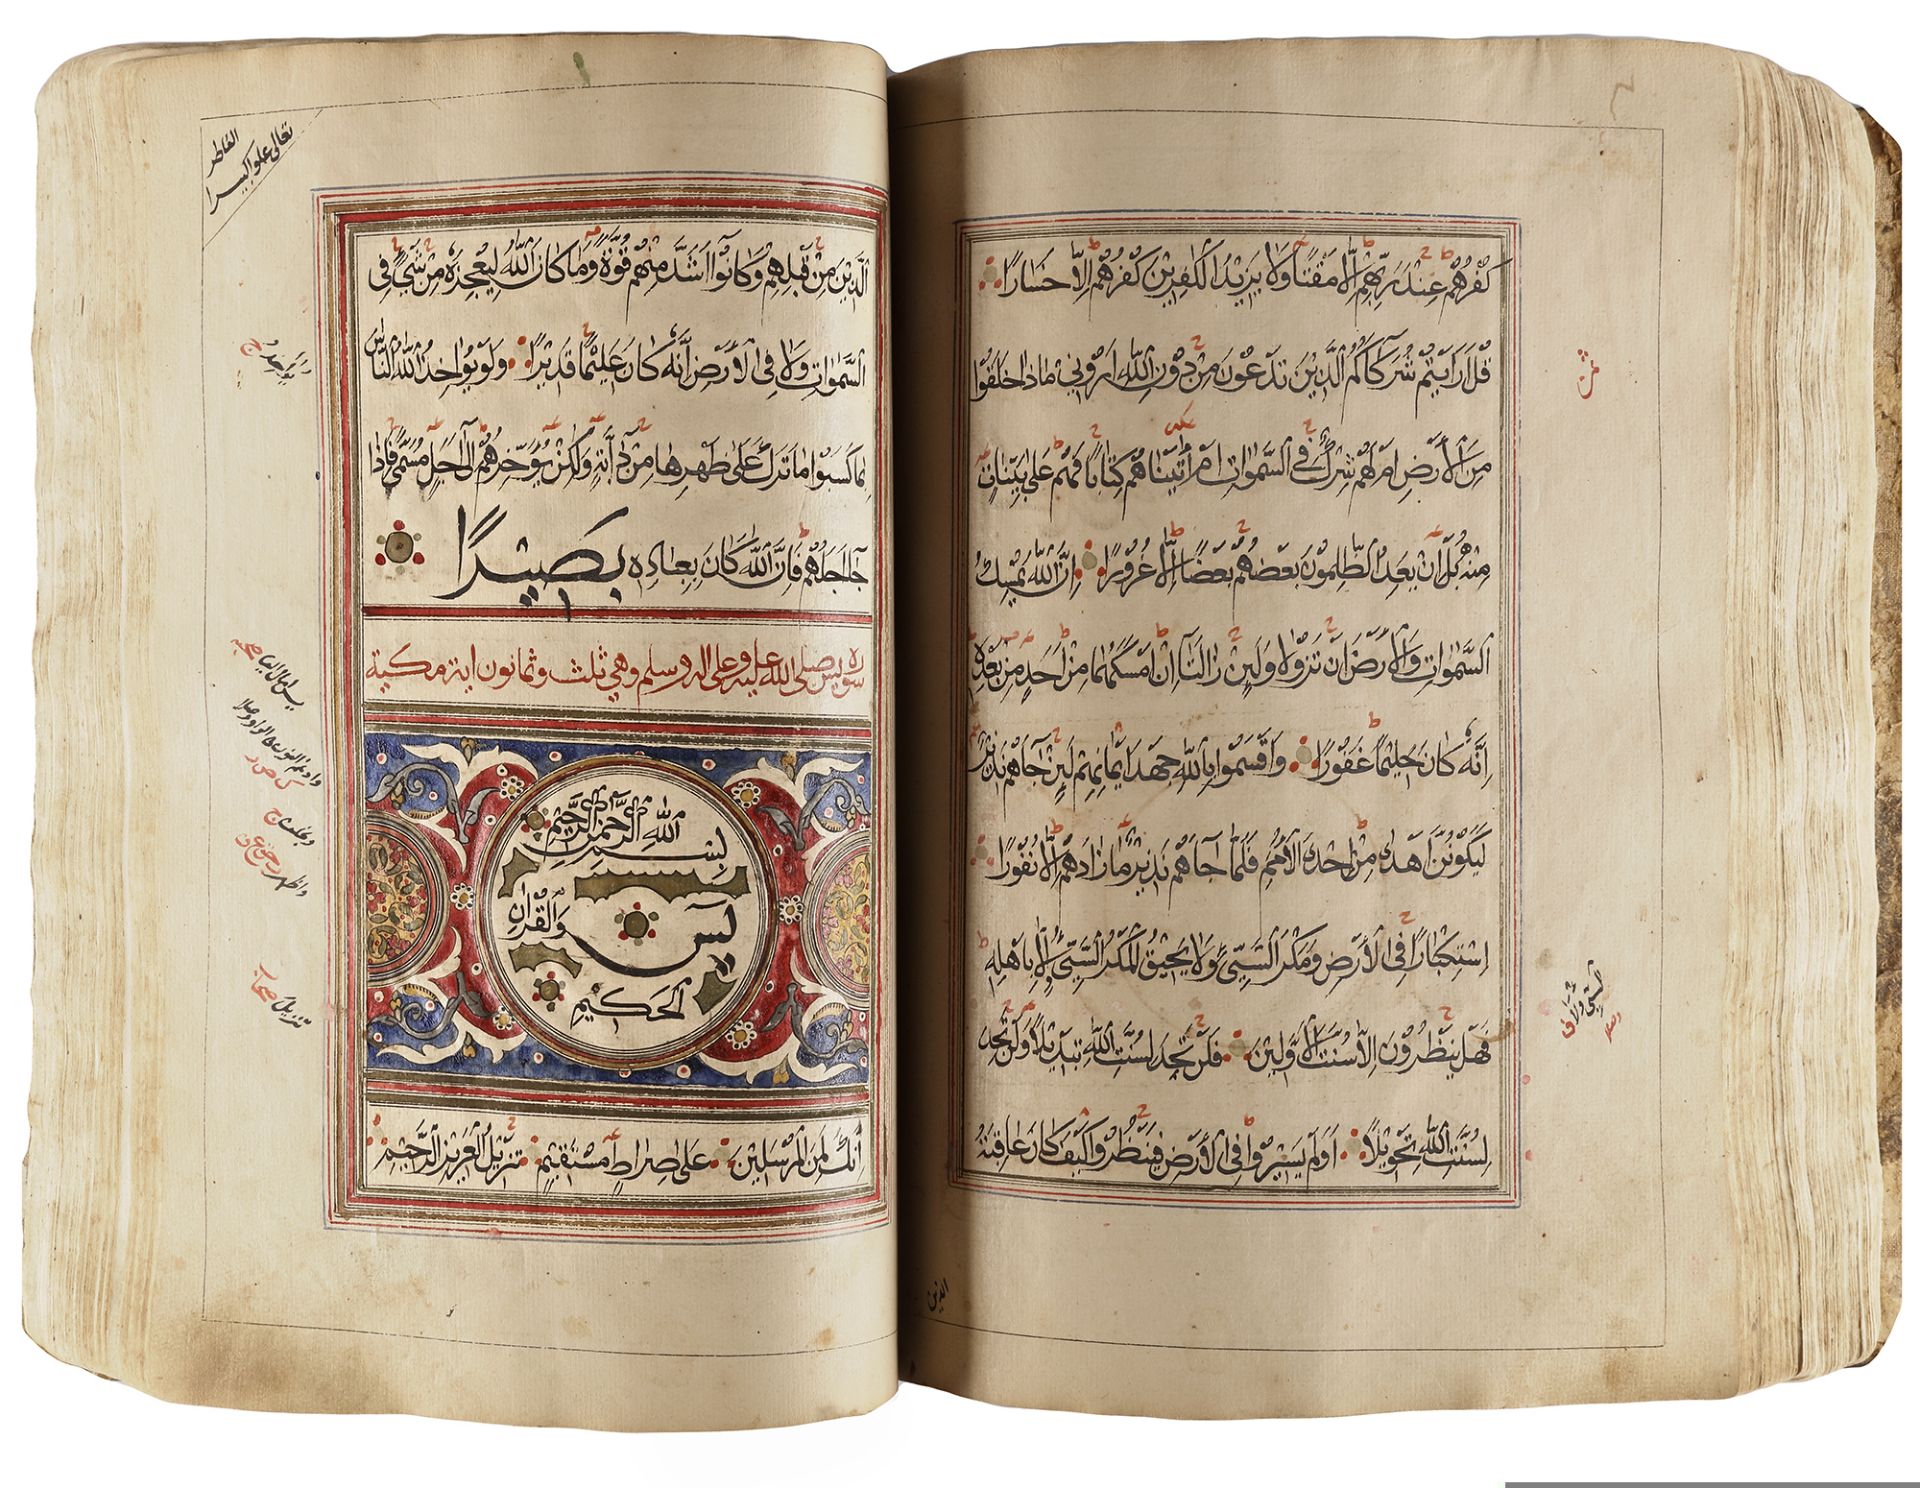 AN ILLUMINATED QURAN, YEMEN, BY AHMED QASEM IBN ISMAIL IN 1035 AH/1626 AD - Image 6 of 18